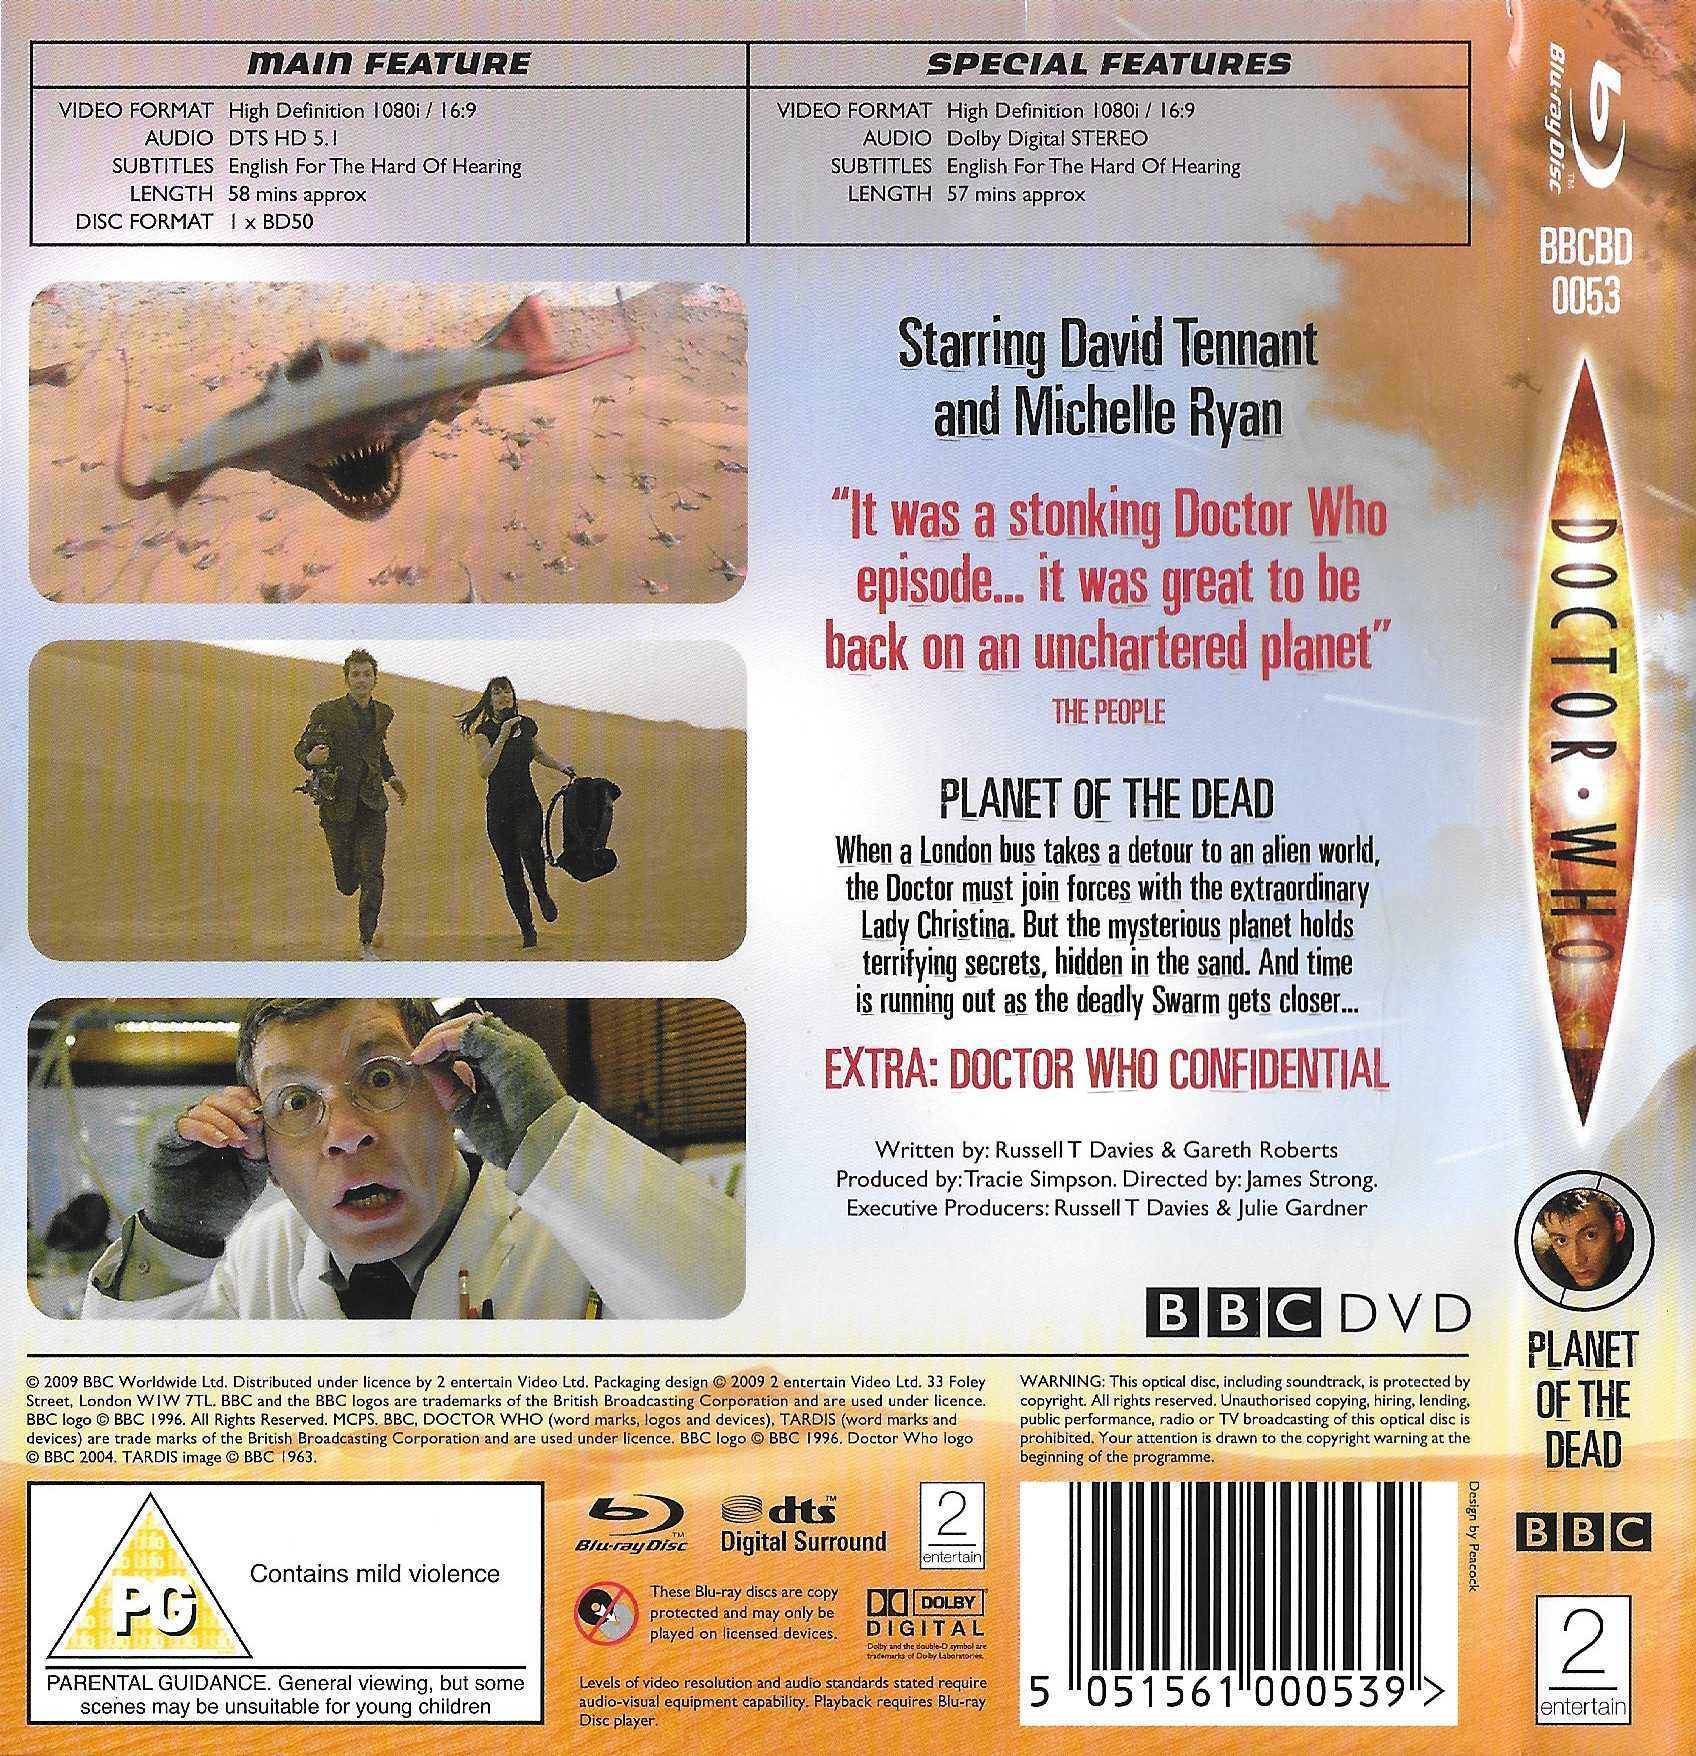 Picture of BBCBD 0053 Doctor Who - Planet of the dead by artist Russell T Davies / Gareth Roberts from the BBC records and Tapes library